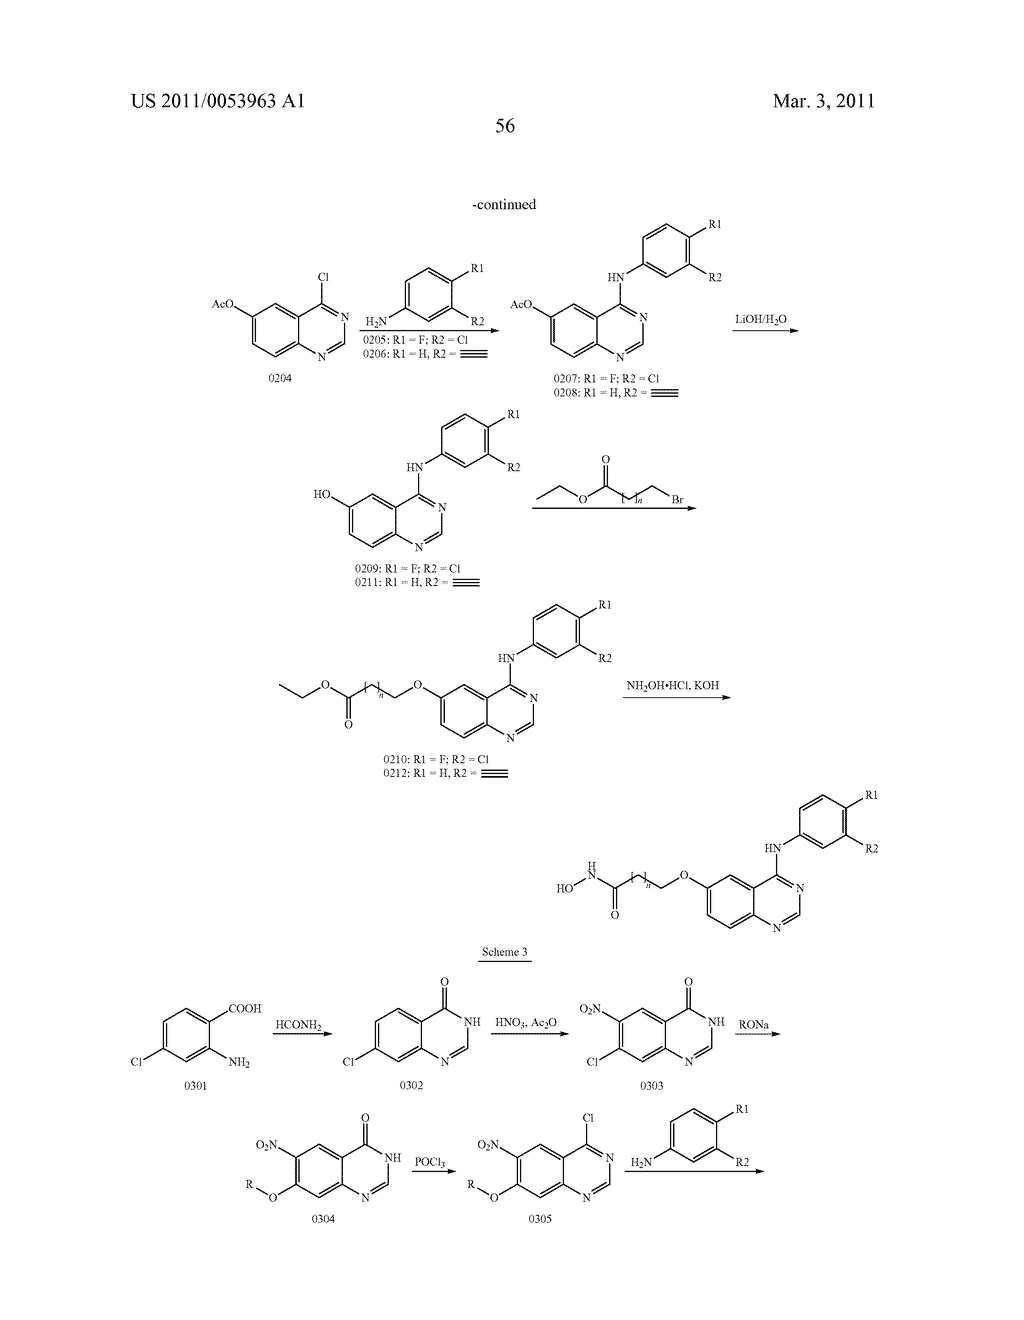 TARTRATE SALTS OF QUINAZOLINE BASED EGFR INHIBITORS CONTAINING A ZINC BINDING MOIETY - diagram, schematic, and image 77